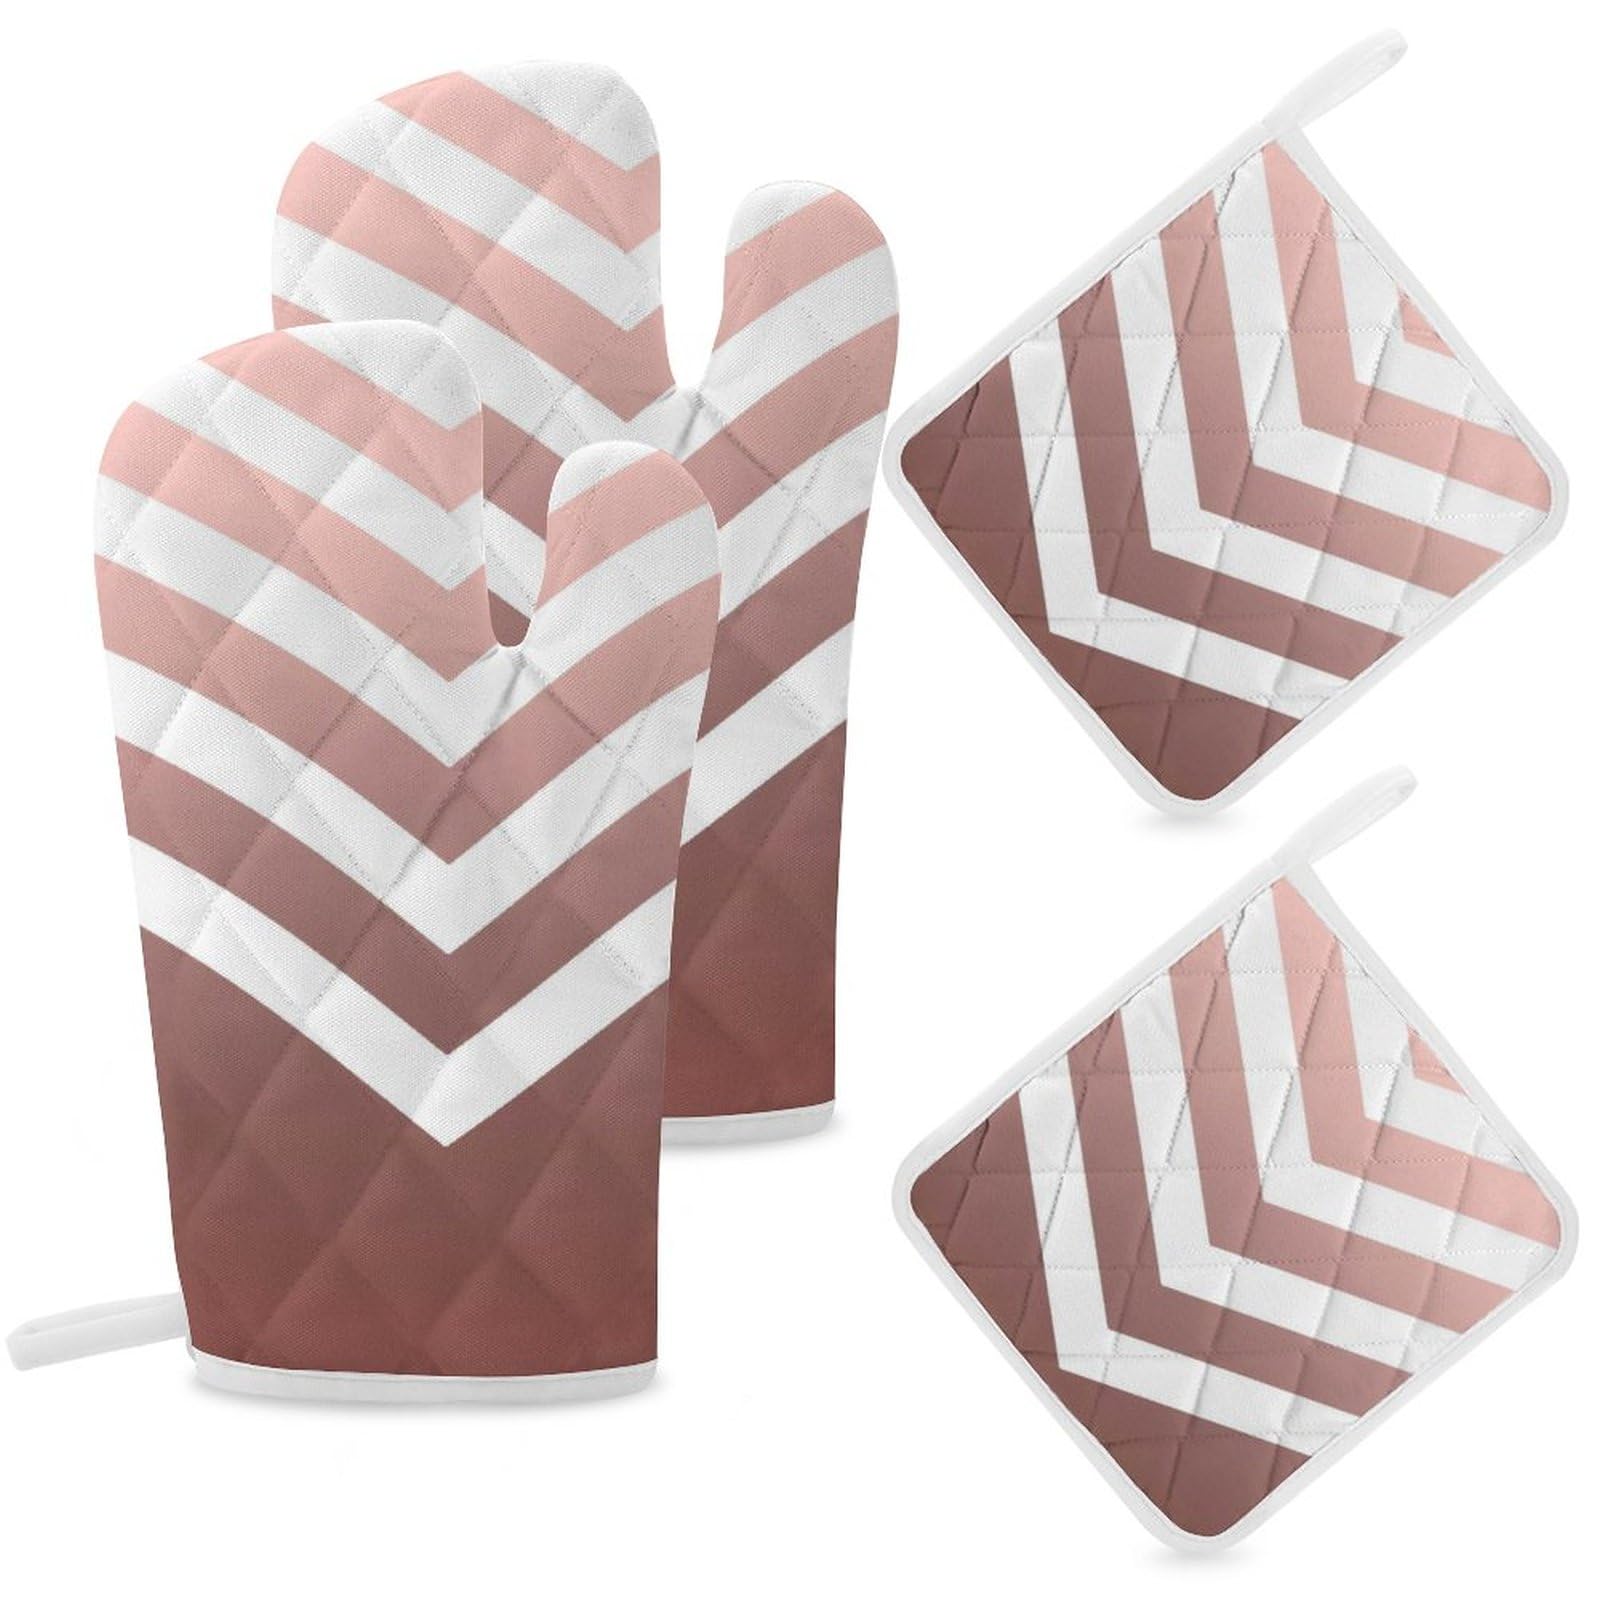 4Pcs Oven Mitts and Pot Holders Set, Rose Gold Chevrons Heat Resistant Oven Mitts Gloves Set Hot Pads for Kitchen Cooking Grill